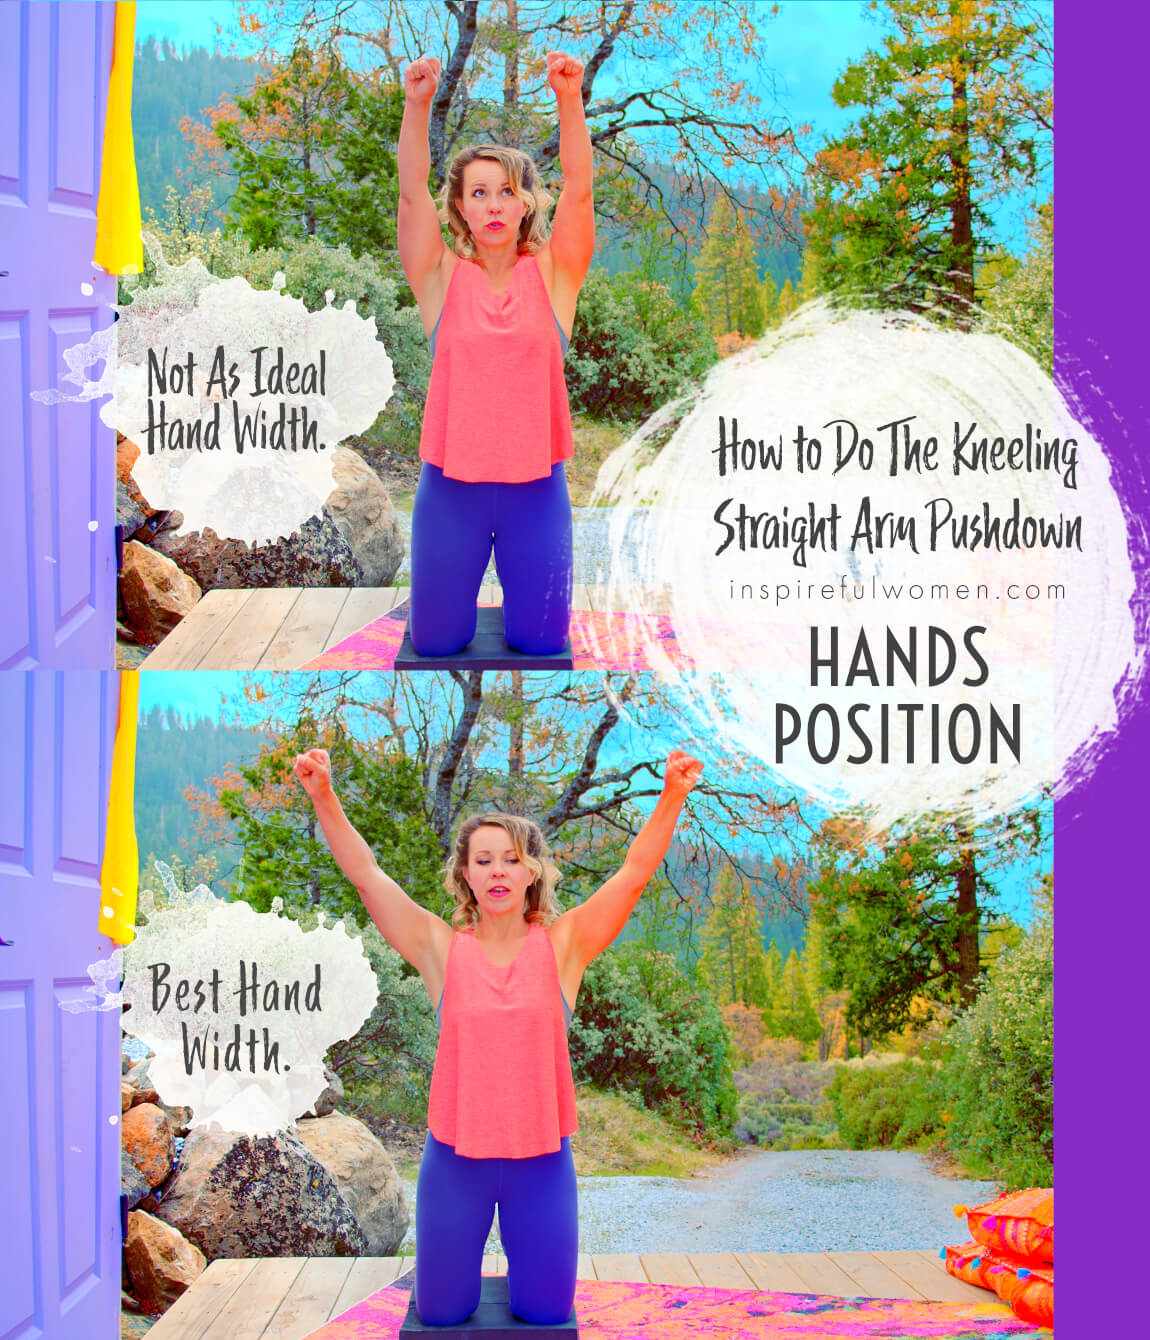 hands-position-how-to-kneeling-straight-arm-pushdown-lat-back-home-workout-for-women-40+